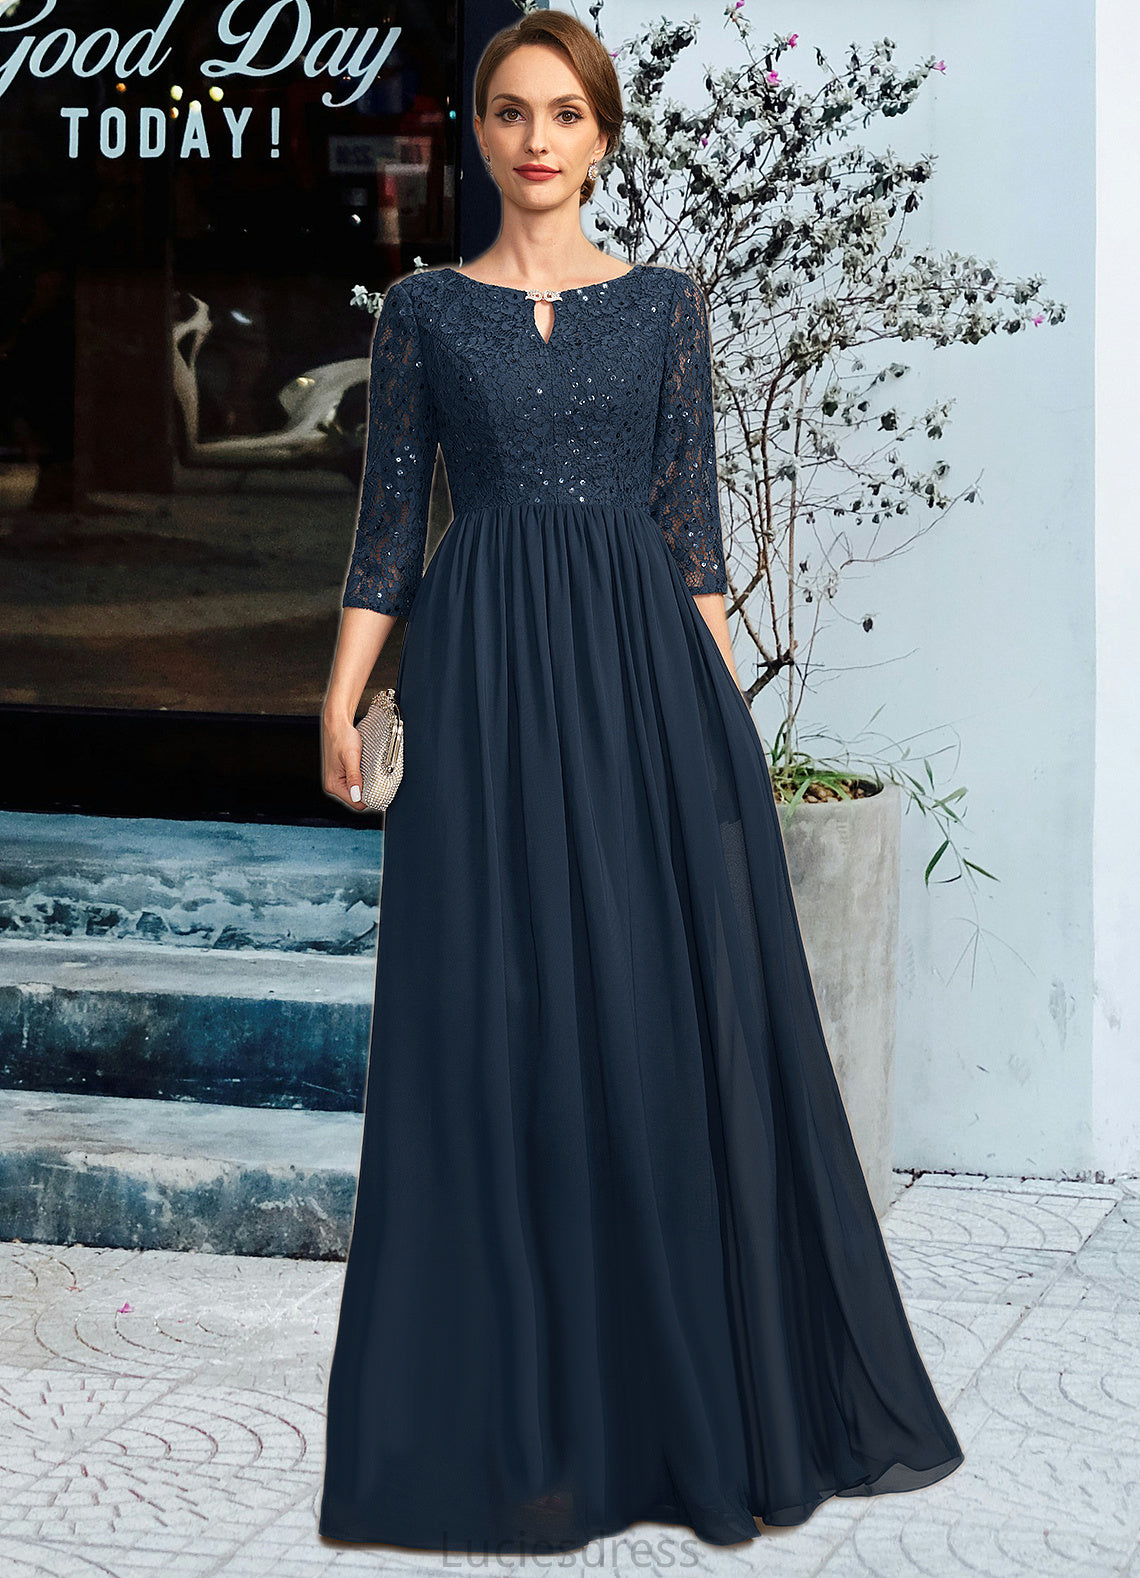 Salome A-line Scoop Floor-Length Chiffon Lace Mother of the Bride Dress With Crystal Brooch Sequins HFP0021961